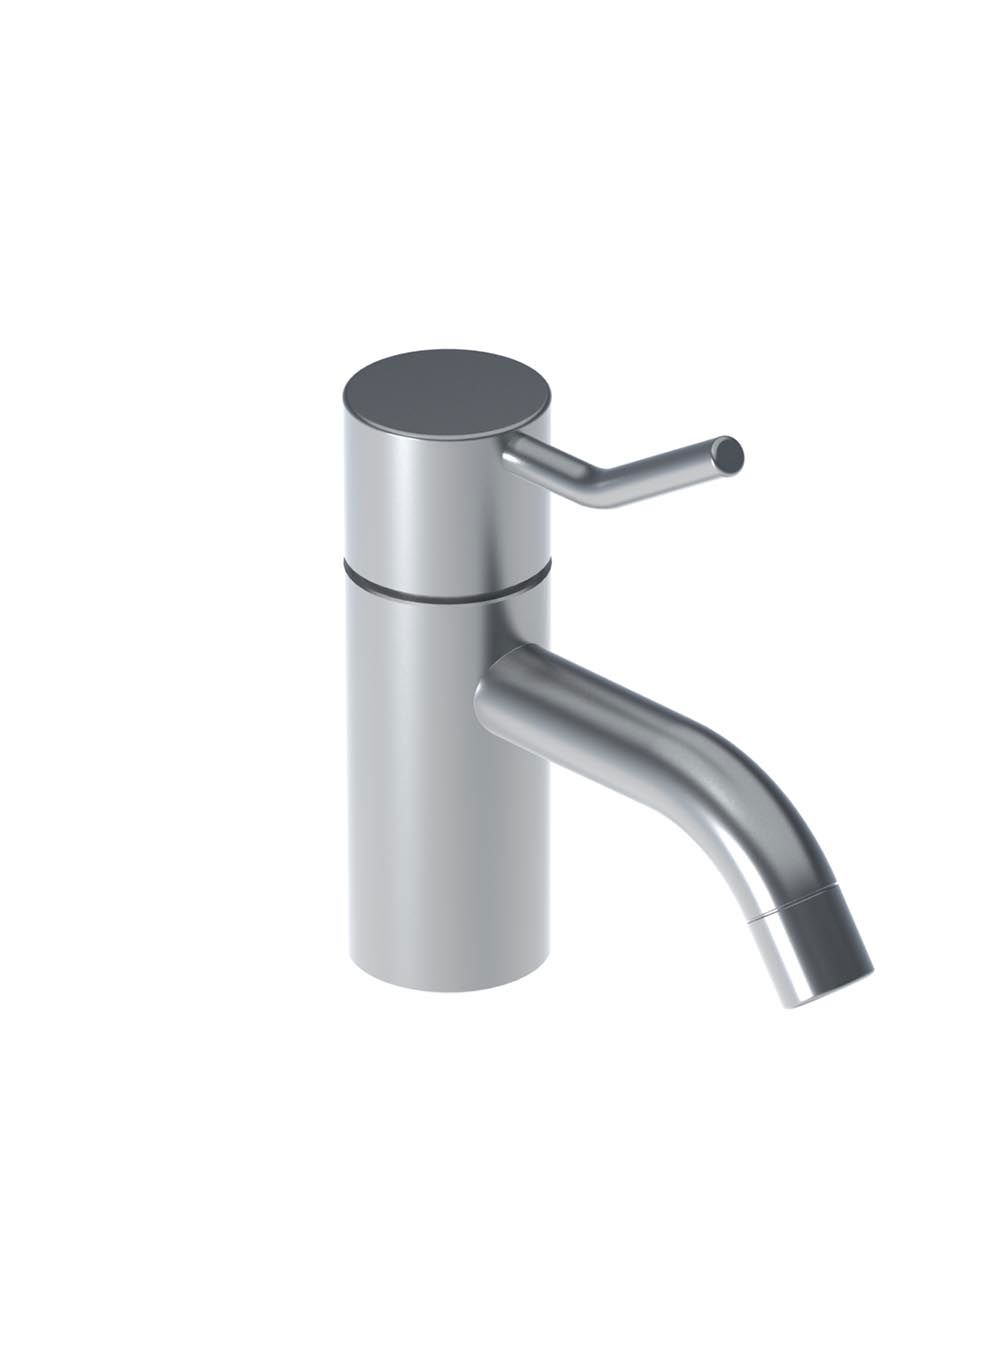 RB1M: Pillar tap with ¼ turn ceramic disc technology, with medium lever, fixed spout, water saving aerator